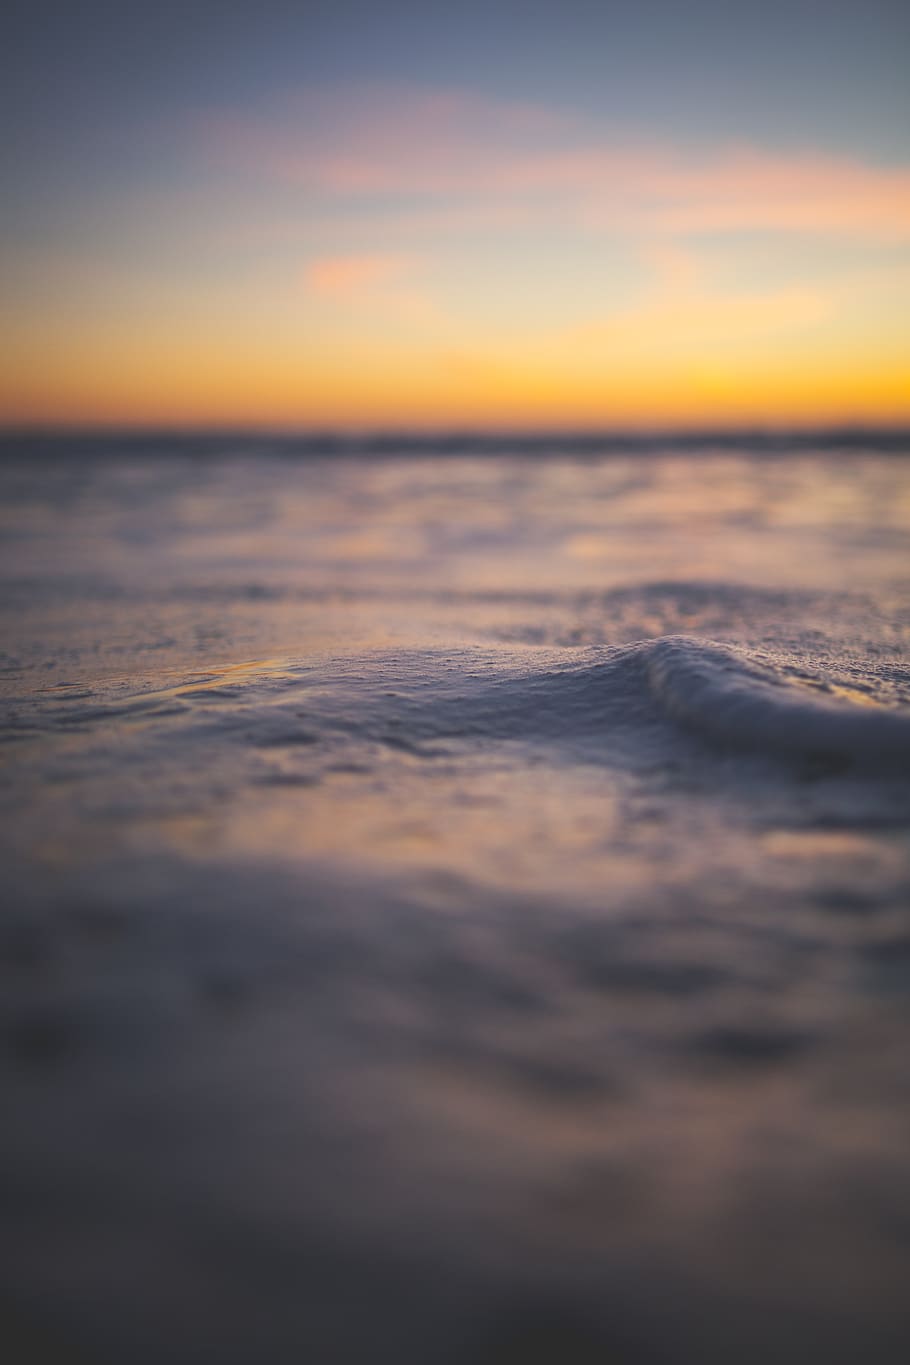 sea, ocean, water, waves, nature, sunset, blur, sky, beauty in nature, scenics - nature